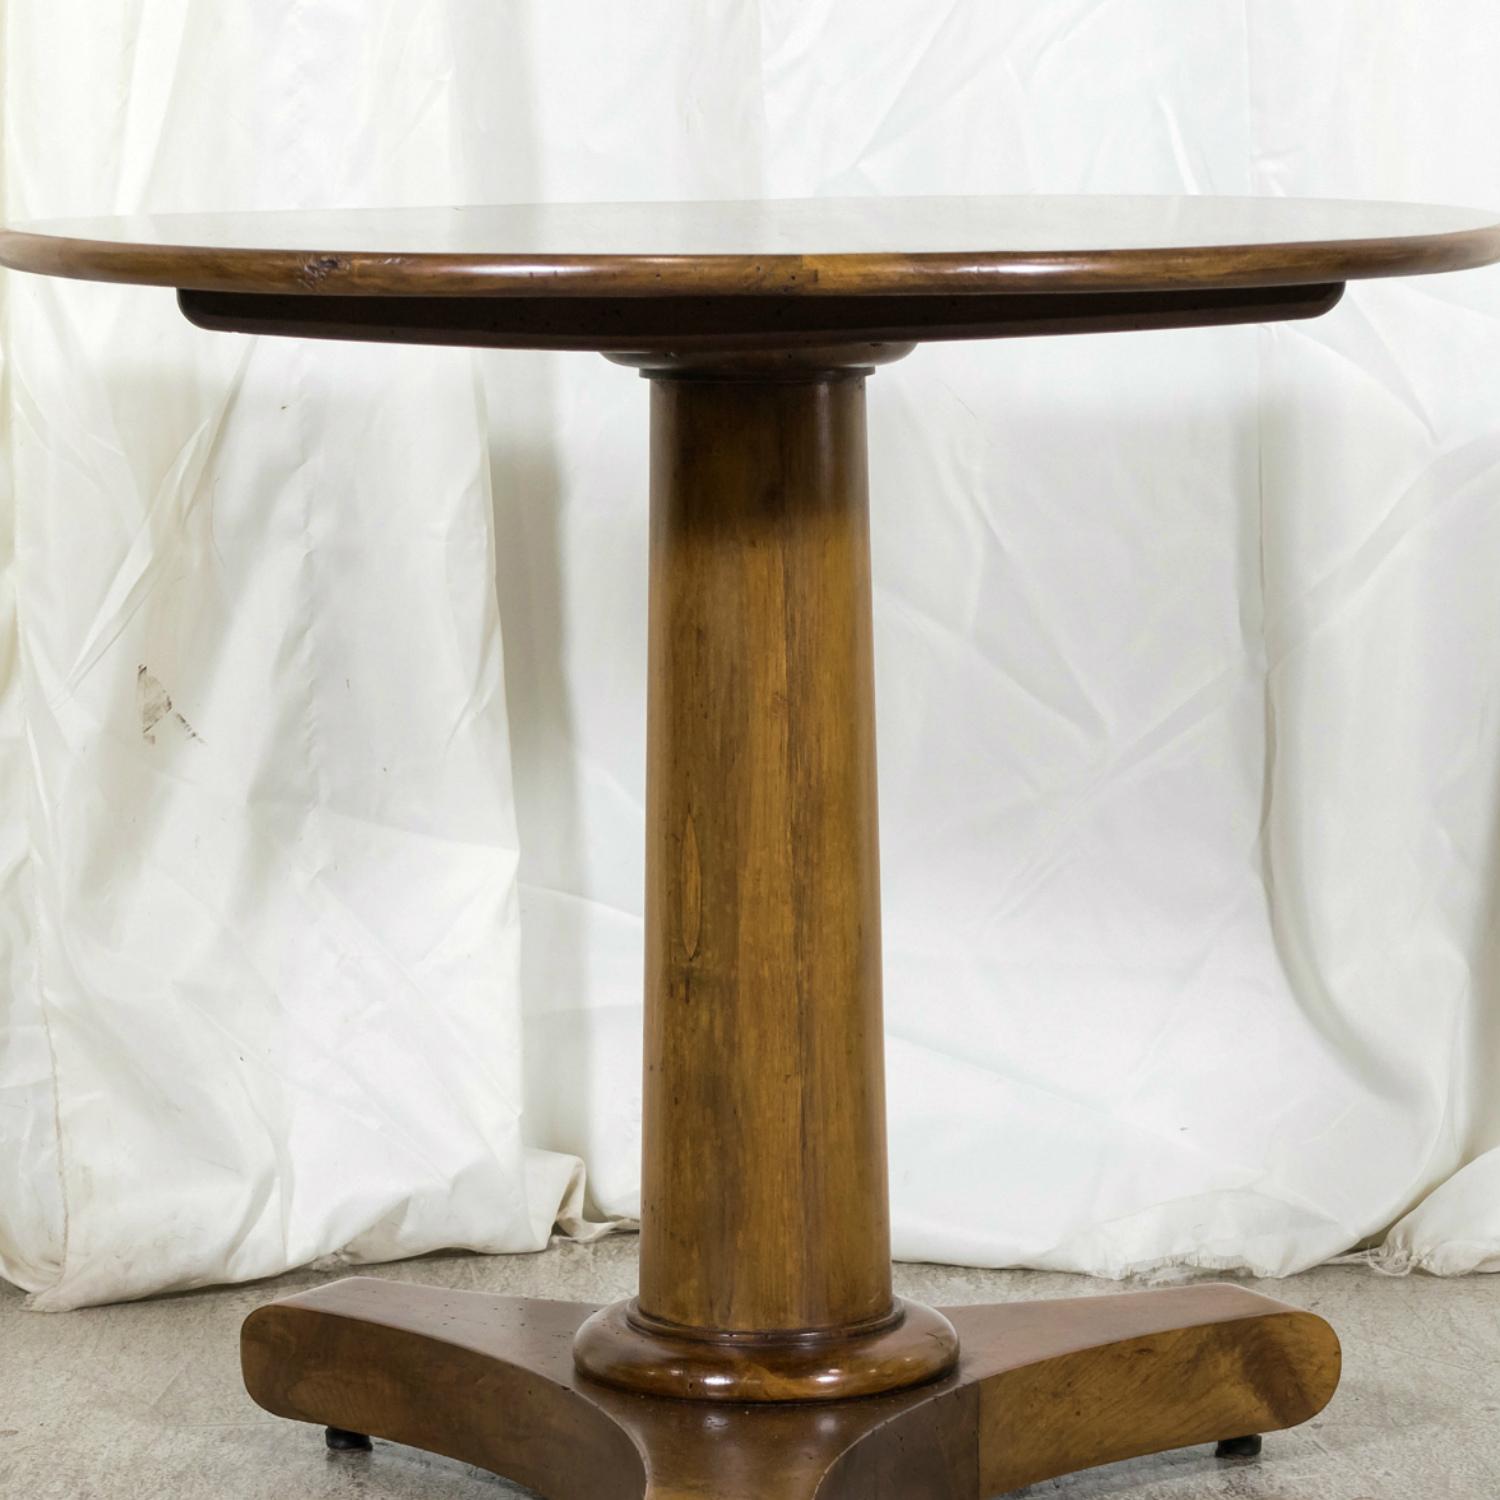 19th Century French Empire Period Solid Walnut Tilt Top Gueridon Side Table 15